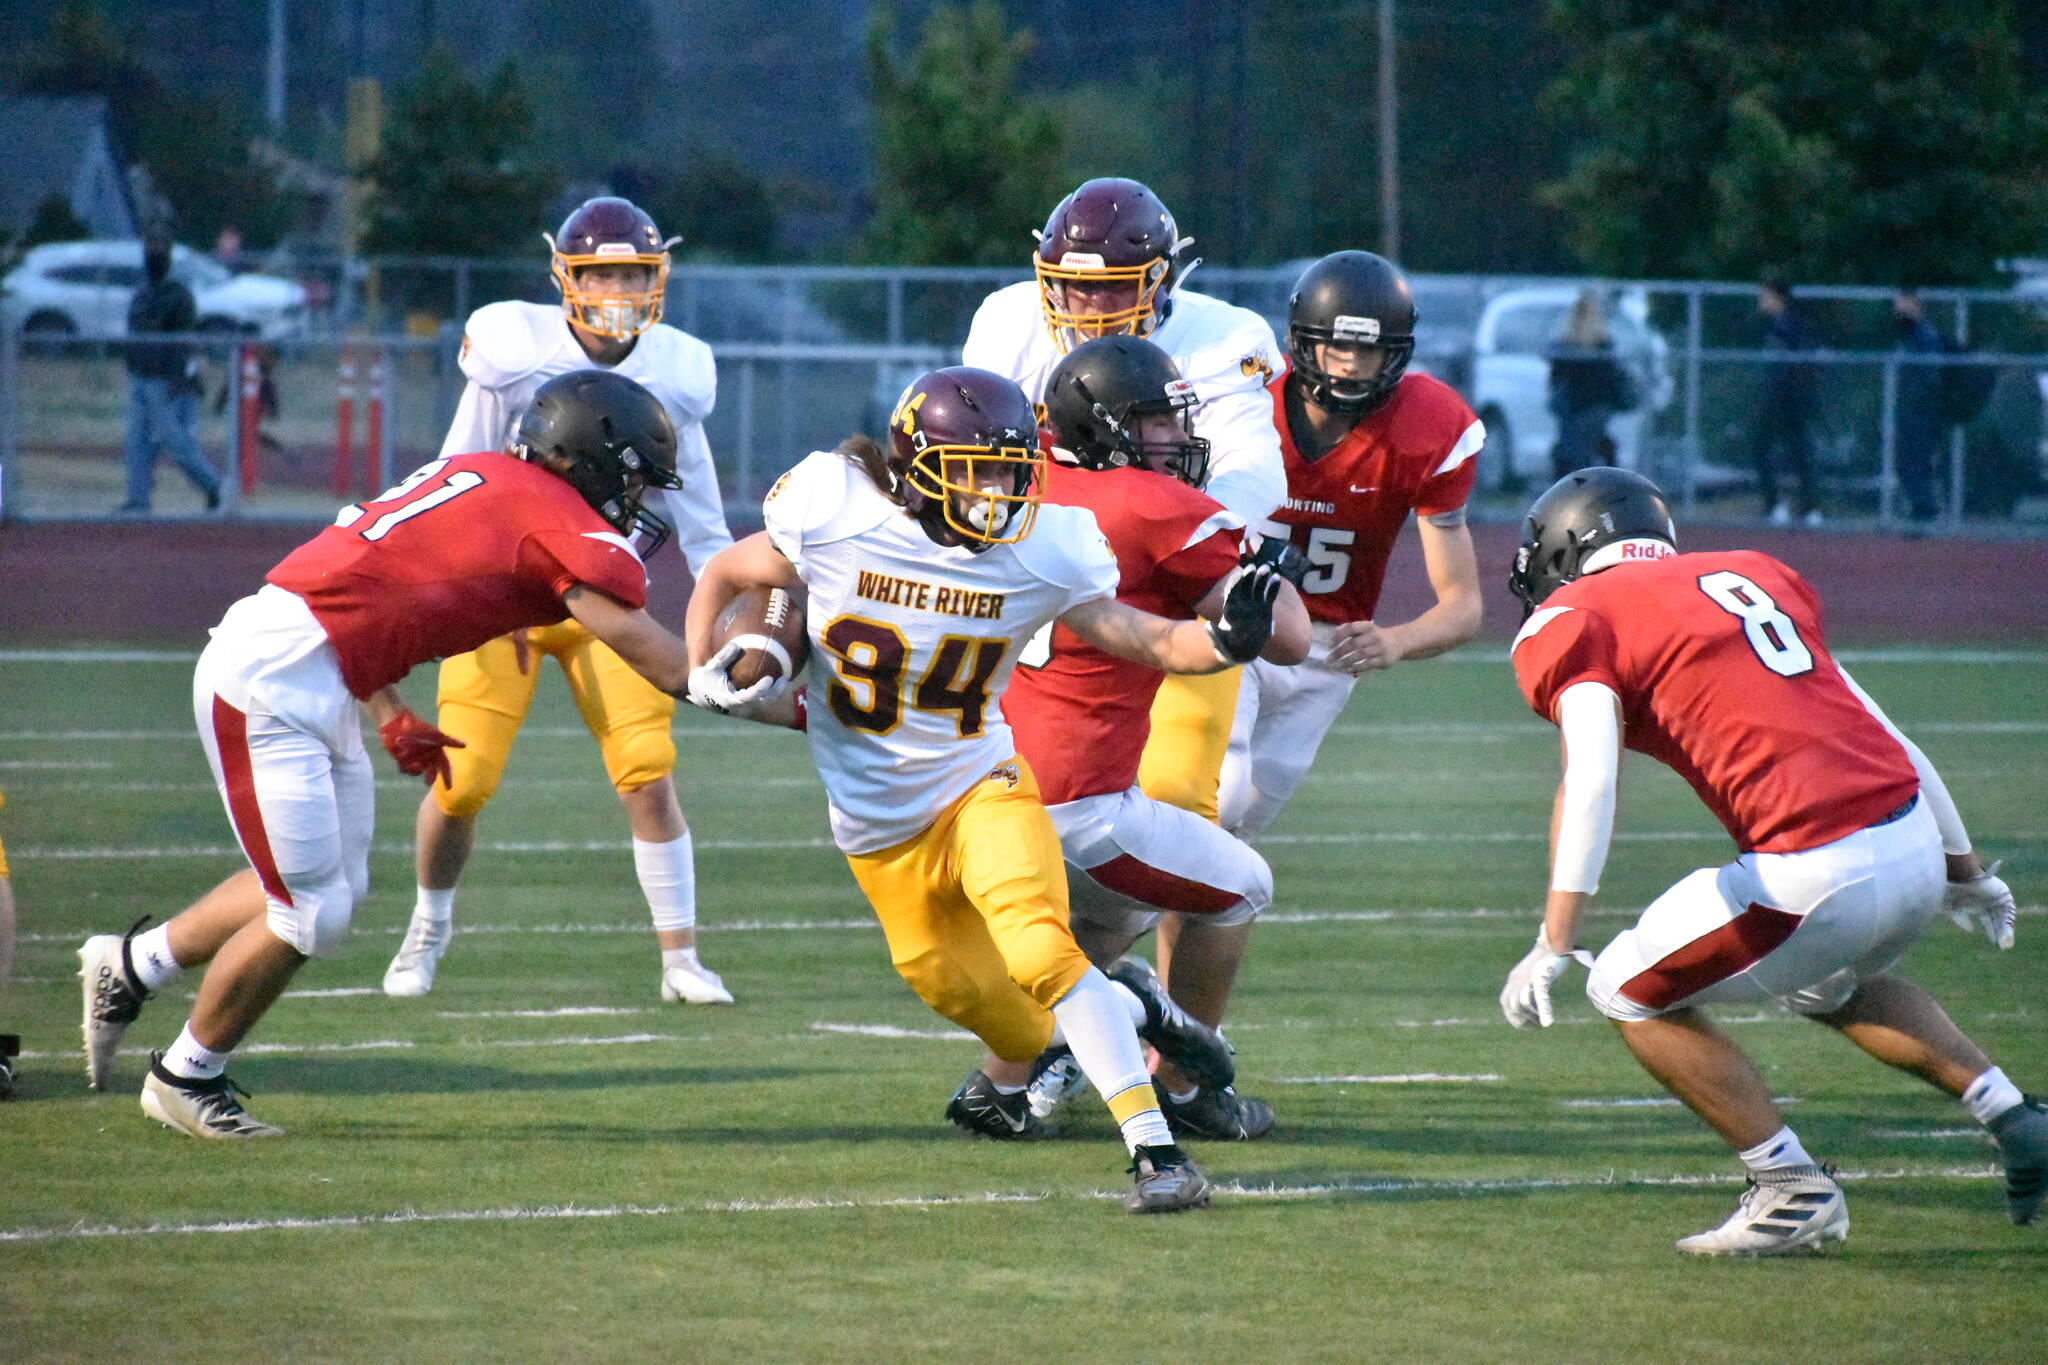 PHOTO BY KEVIN HANSON
White River High’s Payne Plaster evades Orting defenders, picking up a nice gain during Friday night’s road game. The outcome didn’t go the Hornets’ way as the Buckley squad fell to 1-2 on the season.